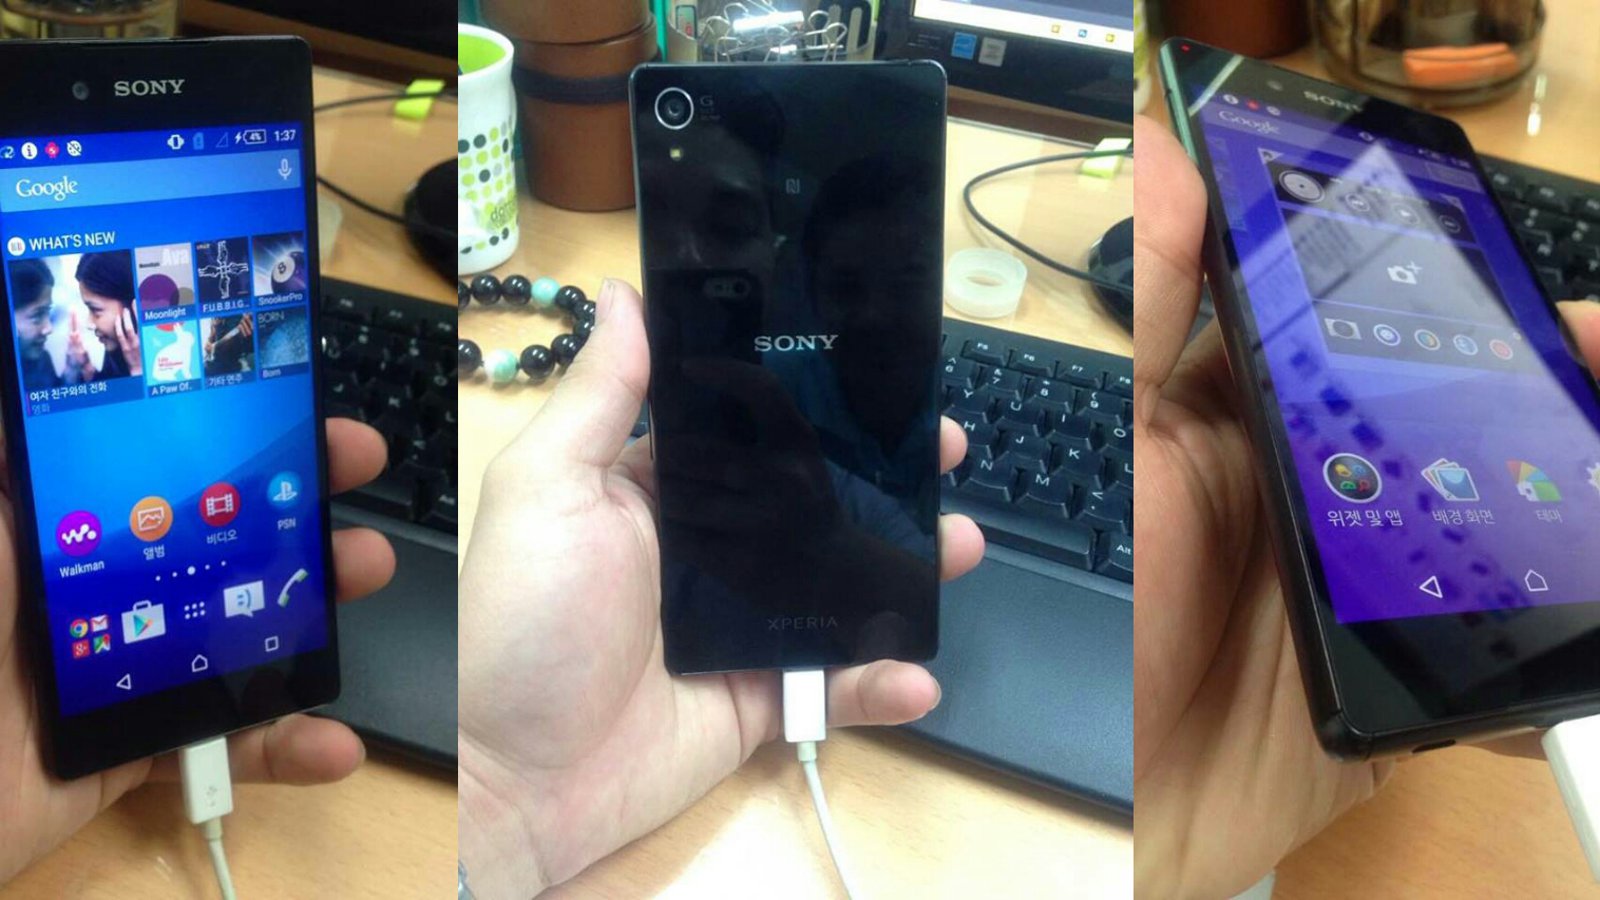 Sony Xperia Z4 Hands-On Images